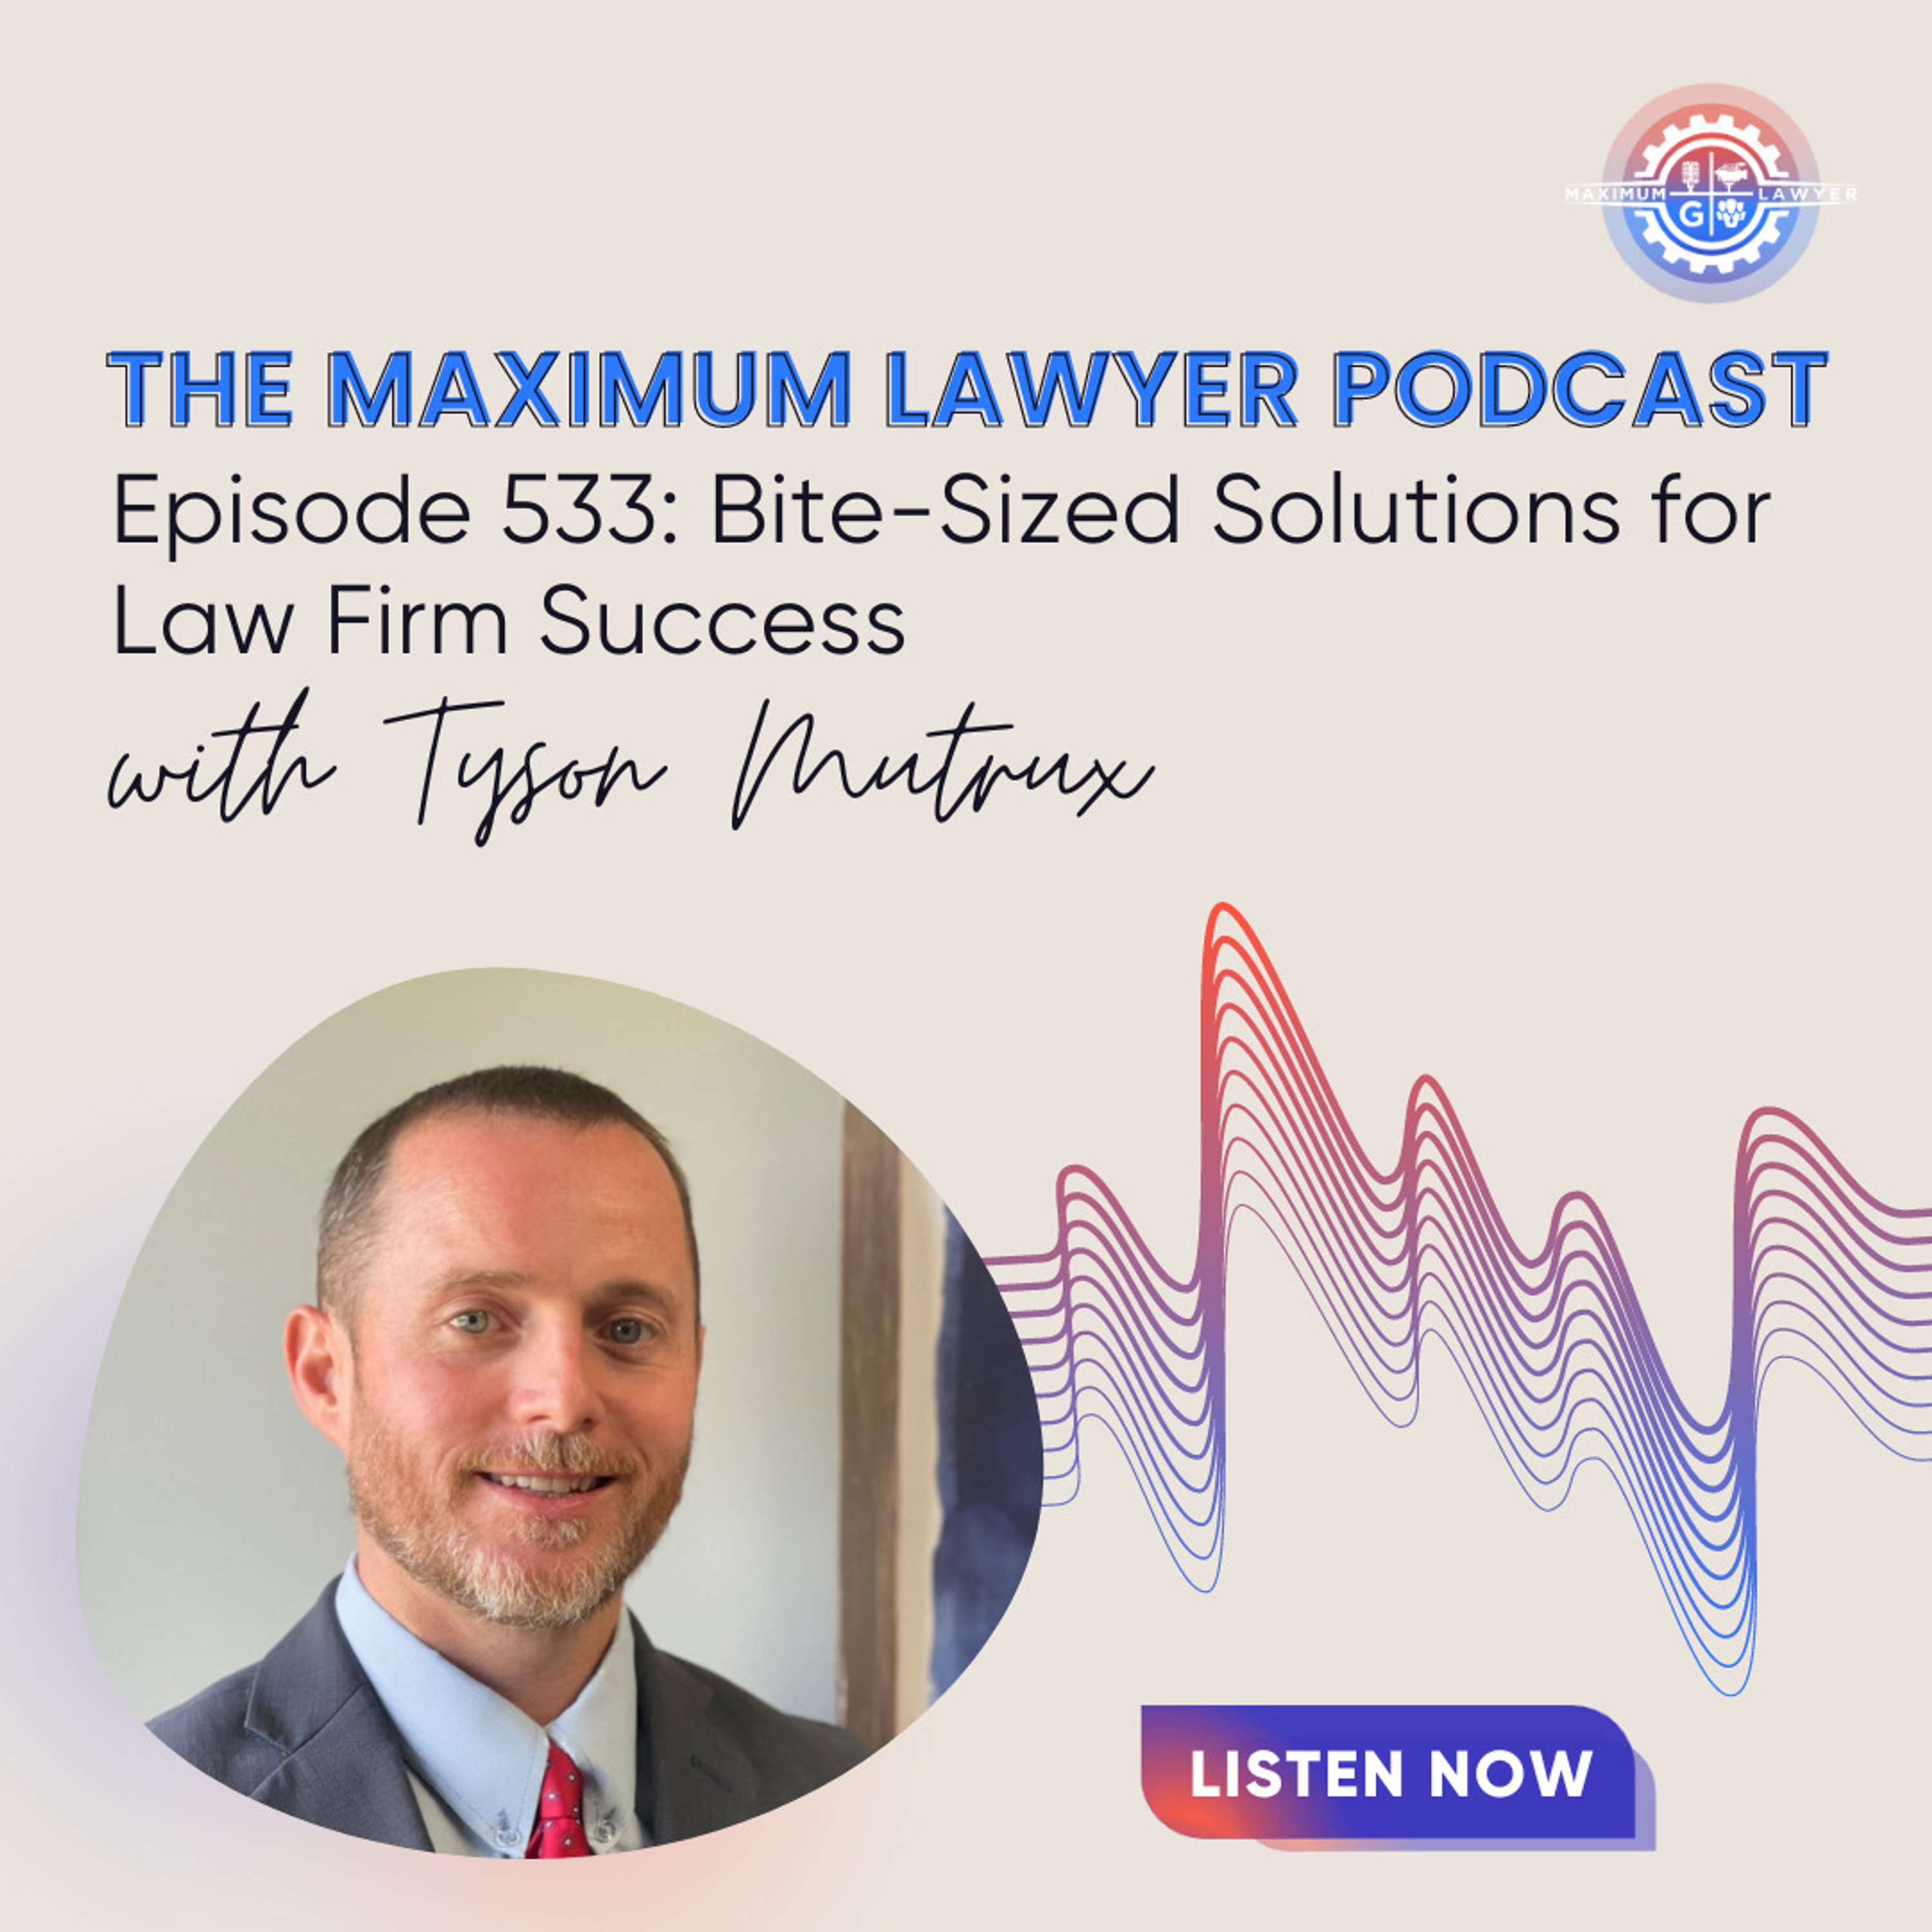 Bite-Sized Solutions for Law Firm Success